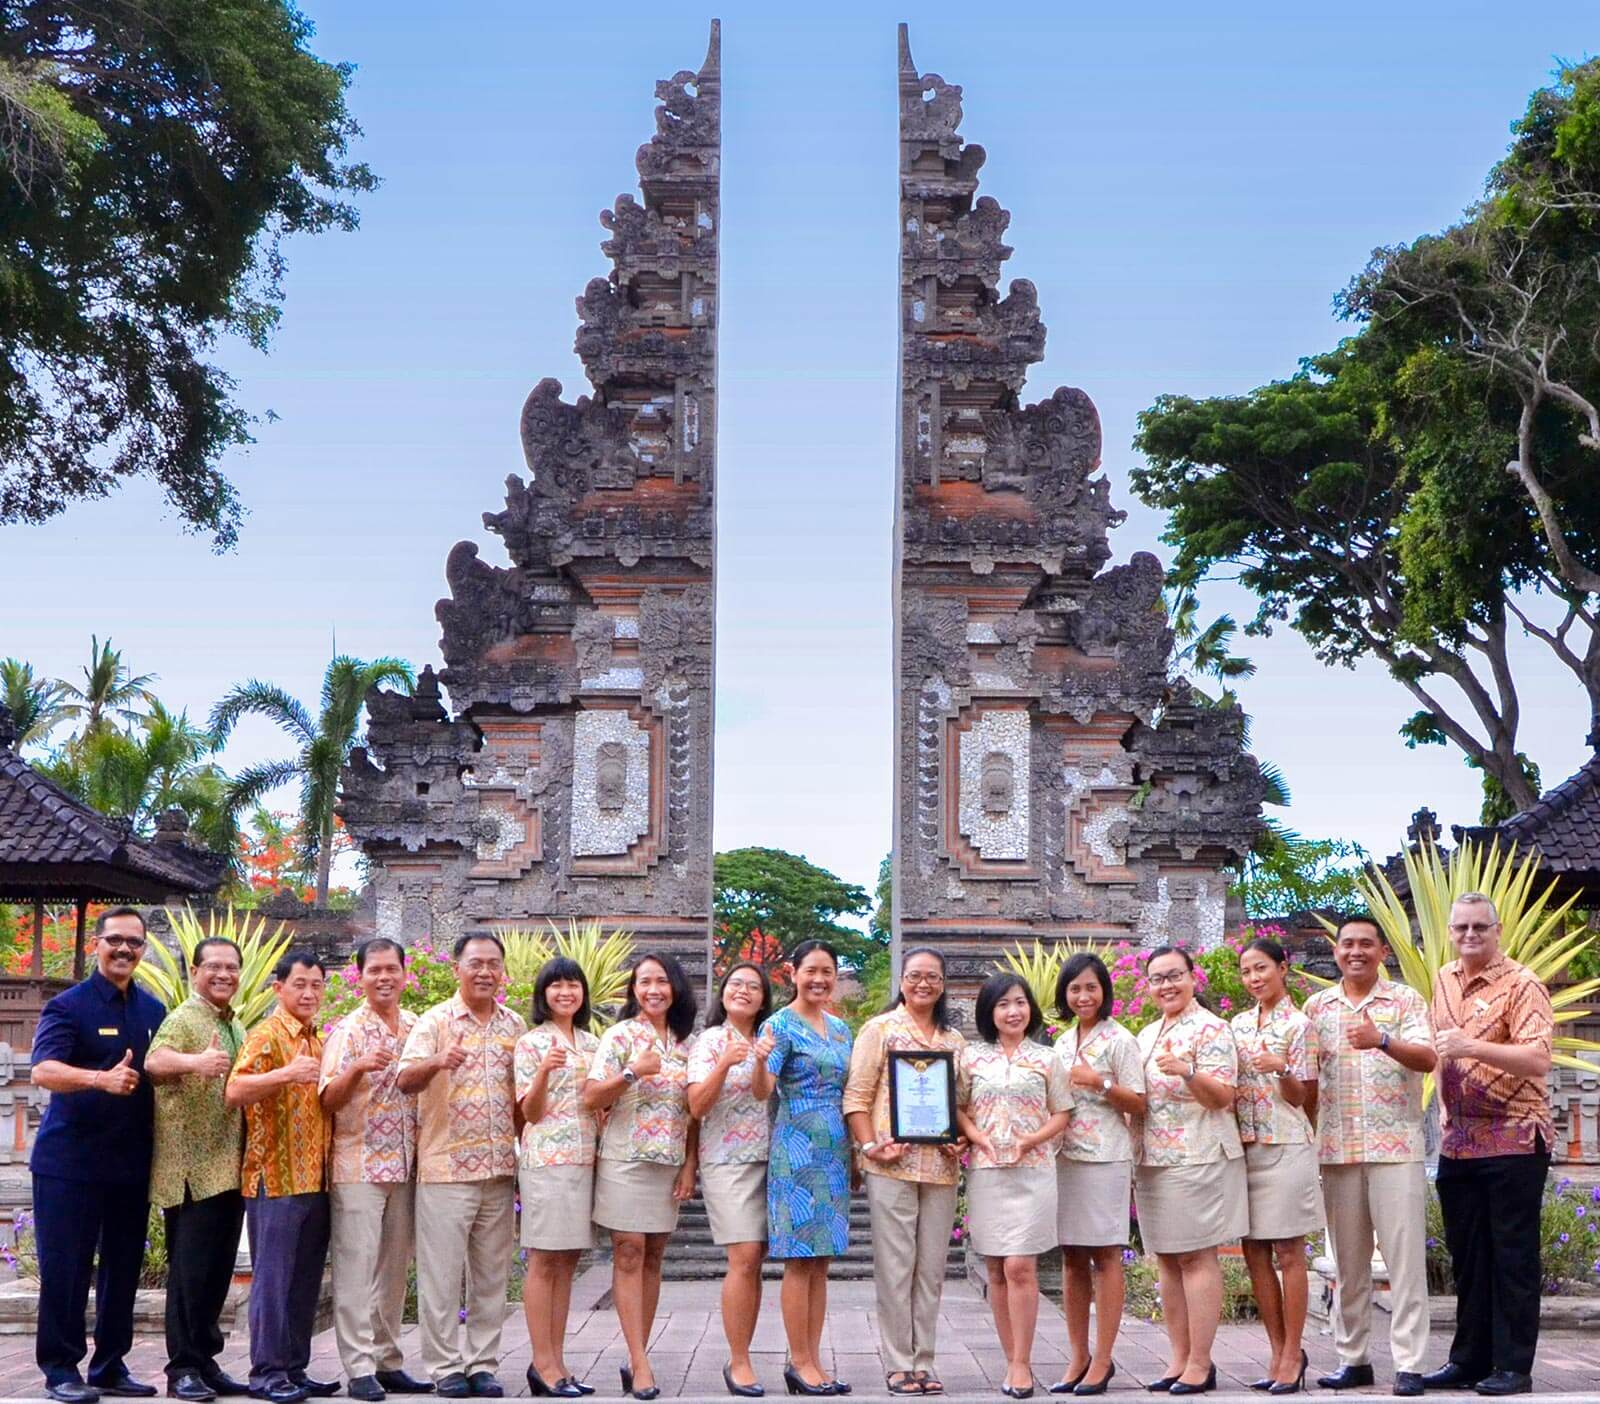 Nusa Dua Beach Hotel Spa Is Acknowledged As Indonesia S Leading Thematic Resort By Indonesia Travel Tourism Awards 19 Nusa Dua Beach Hotel Spa Bali